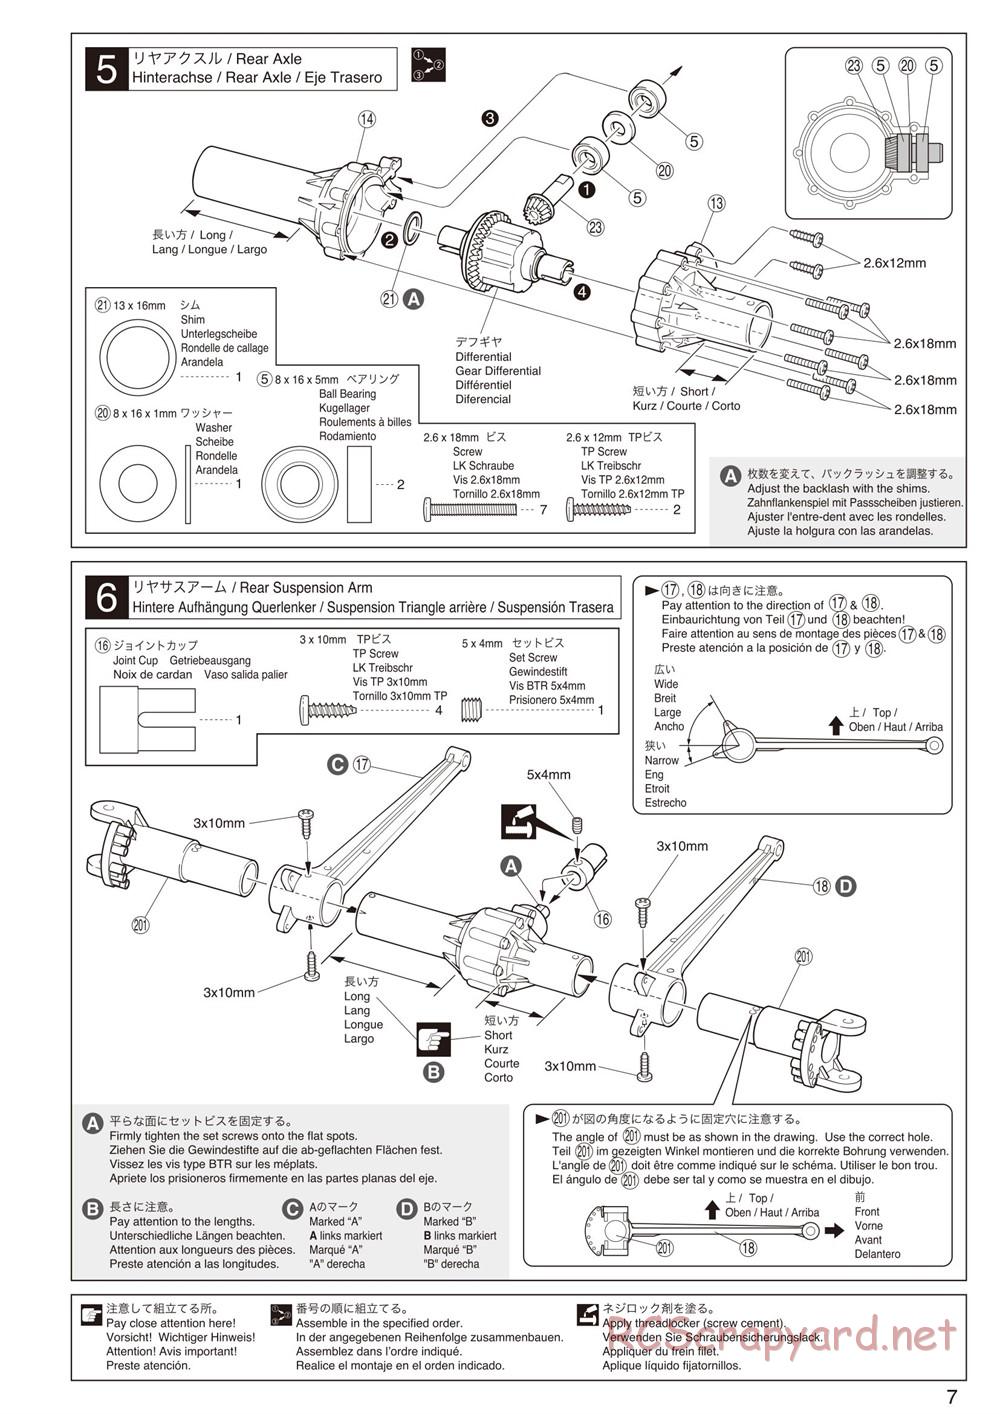 Kyosho - Mad Force Cruiser - Manual - Page 7